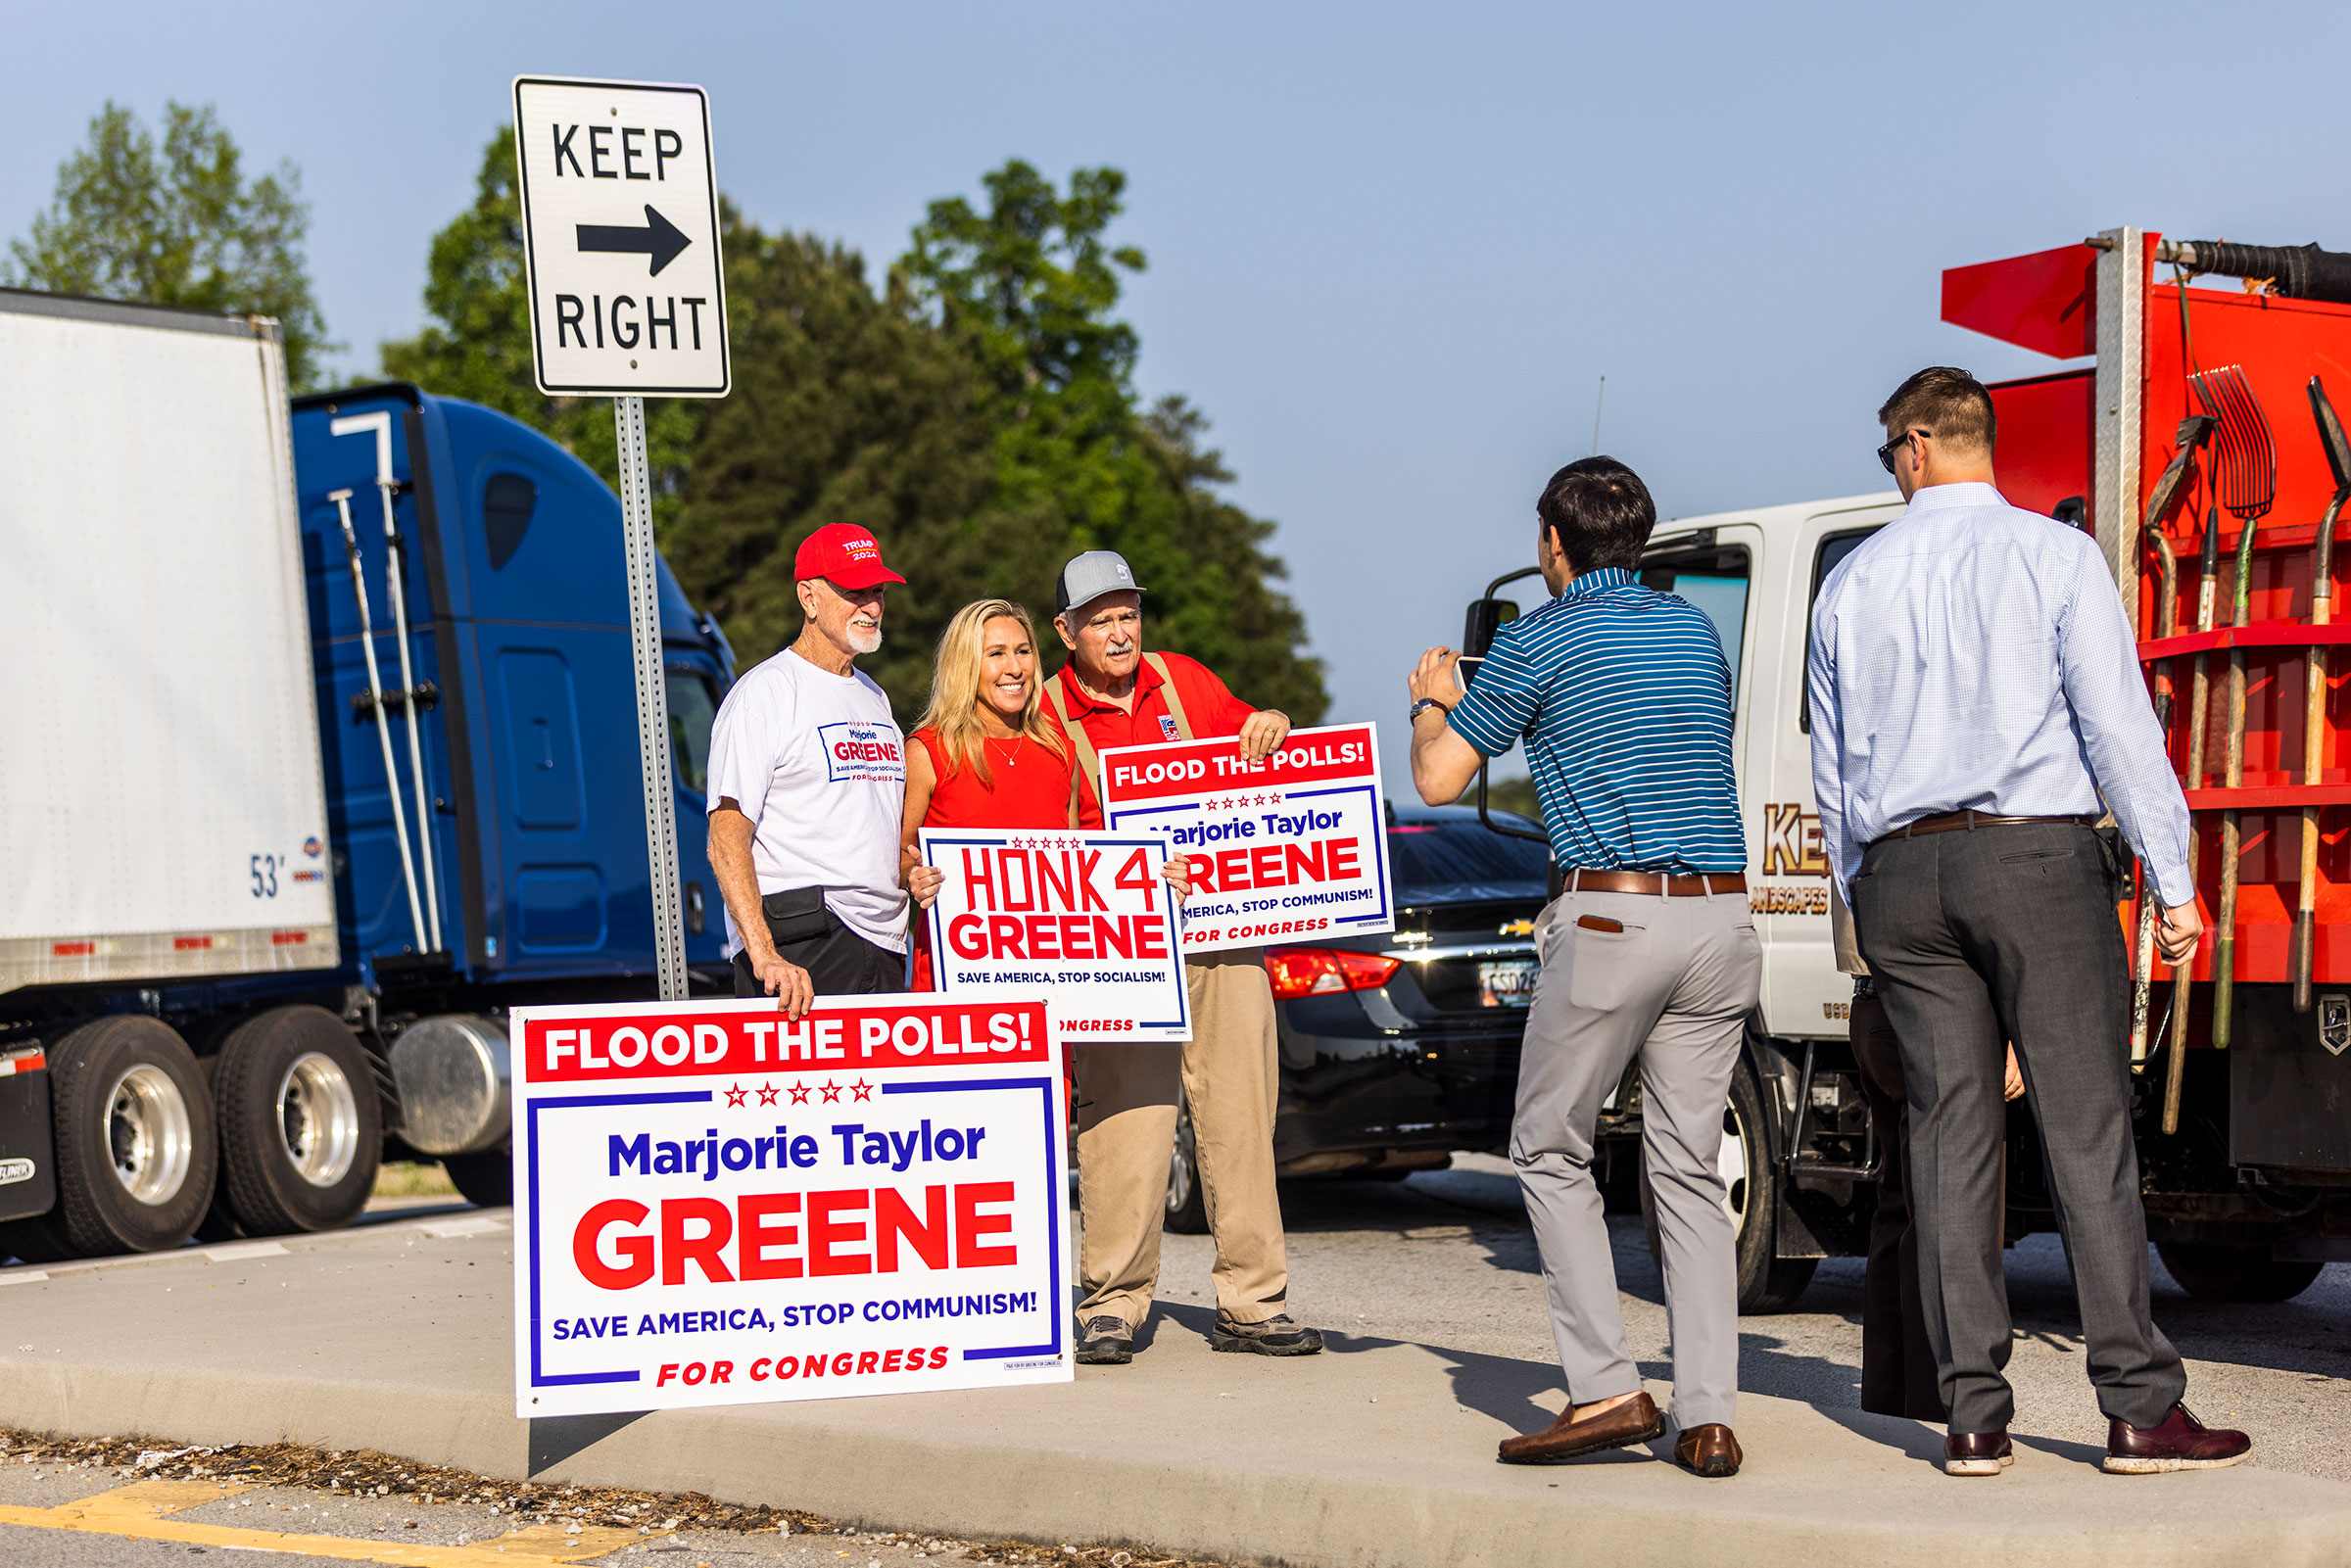 Greene waves signs with supporters outside a voting center in Dallas, Ga. (Andrew Hetherington for TIME)